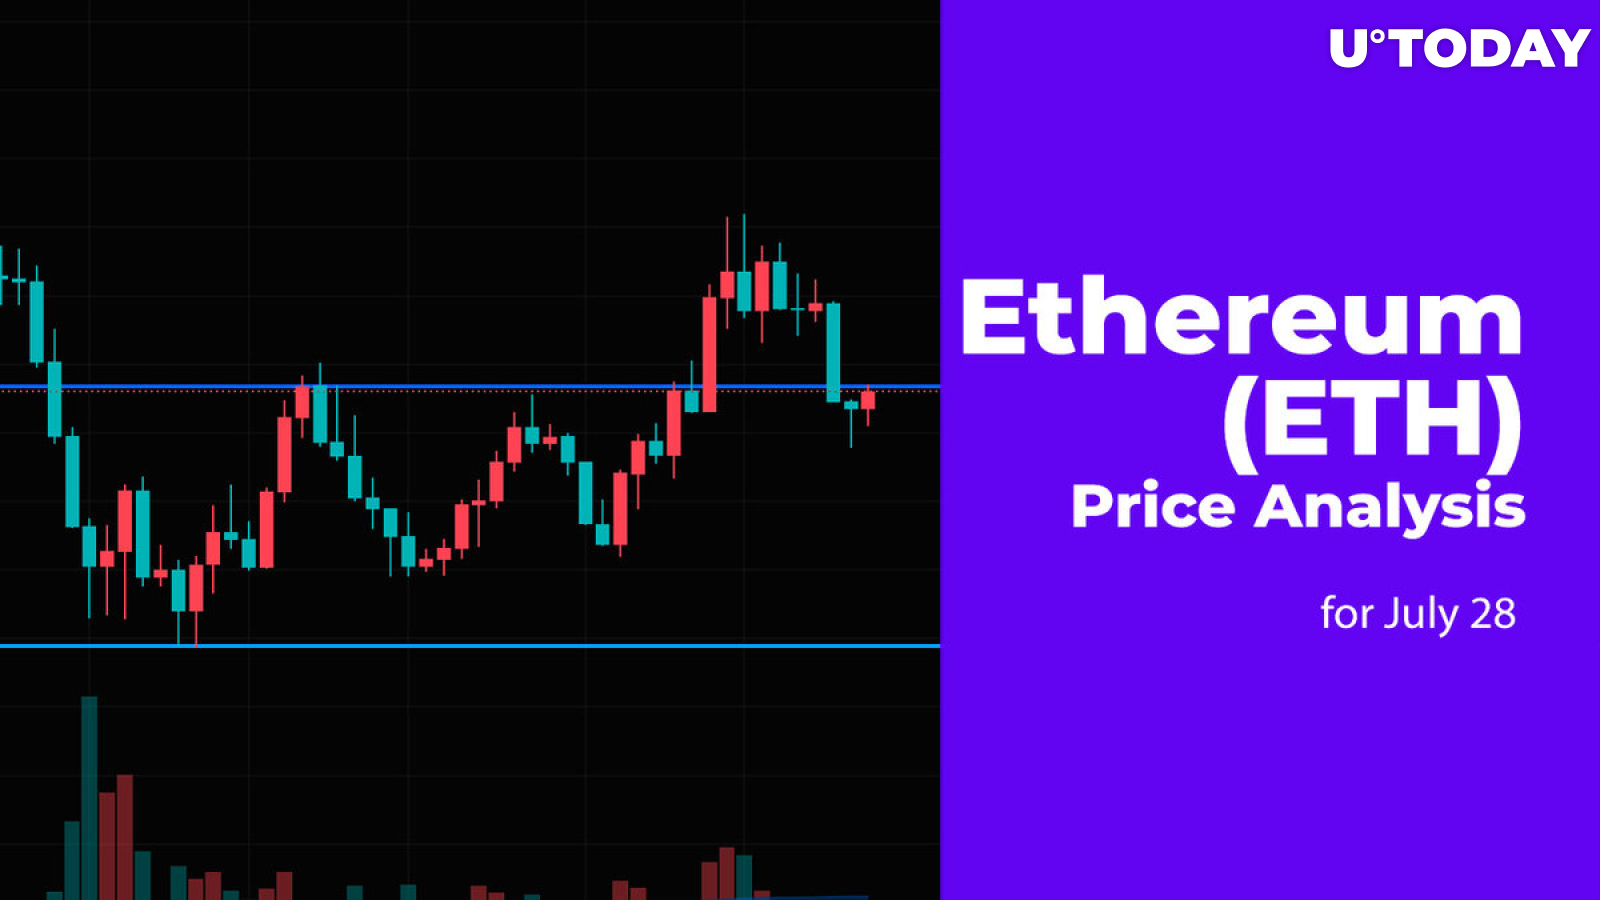 Ethereum (ETH) Price Analysis for July 28